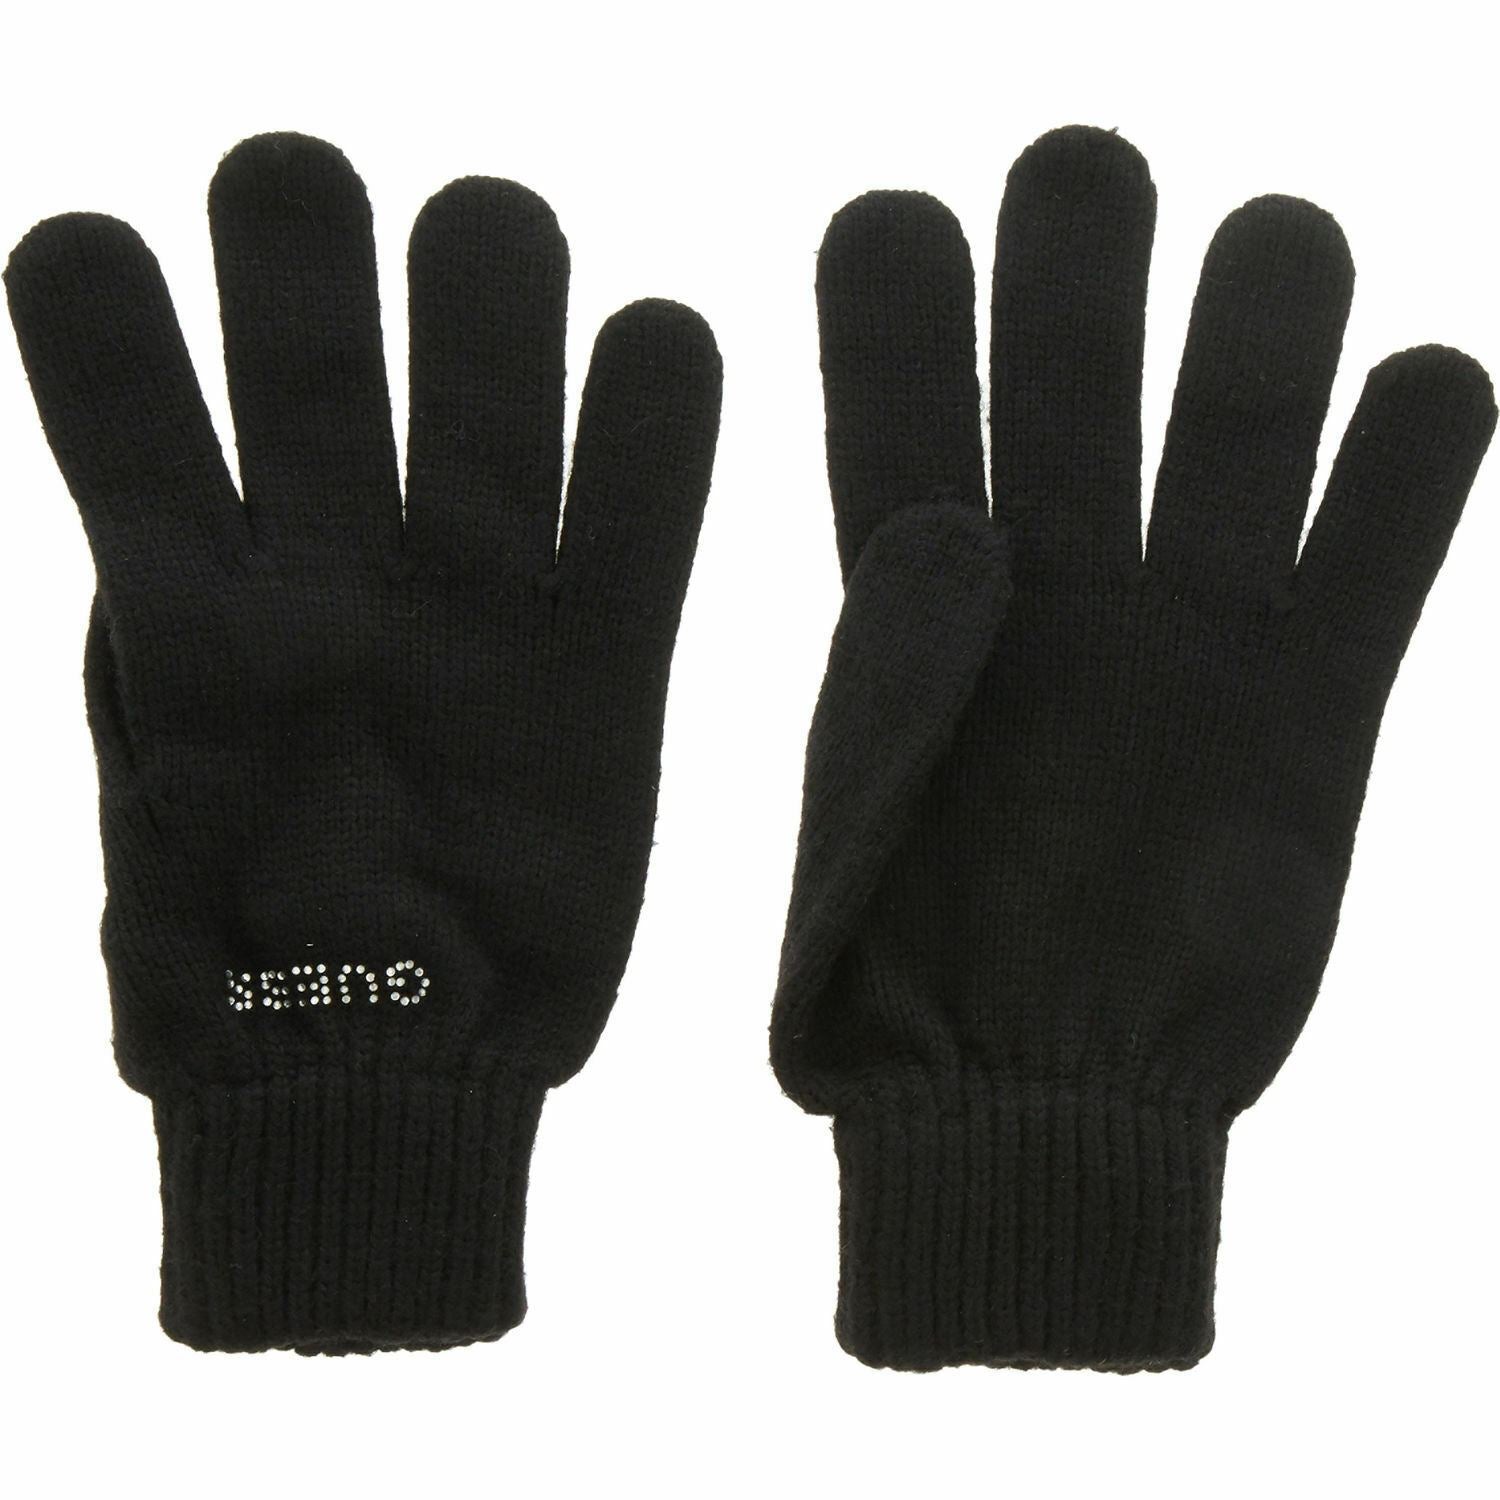 GUESS Women's Cashmere Blend Knitted Gloves, Black, size M /size L